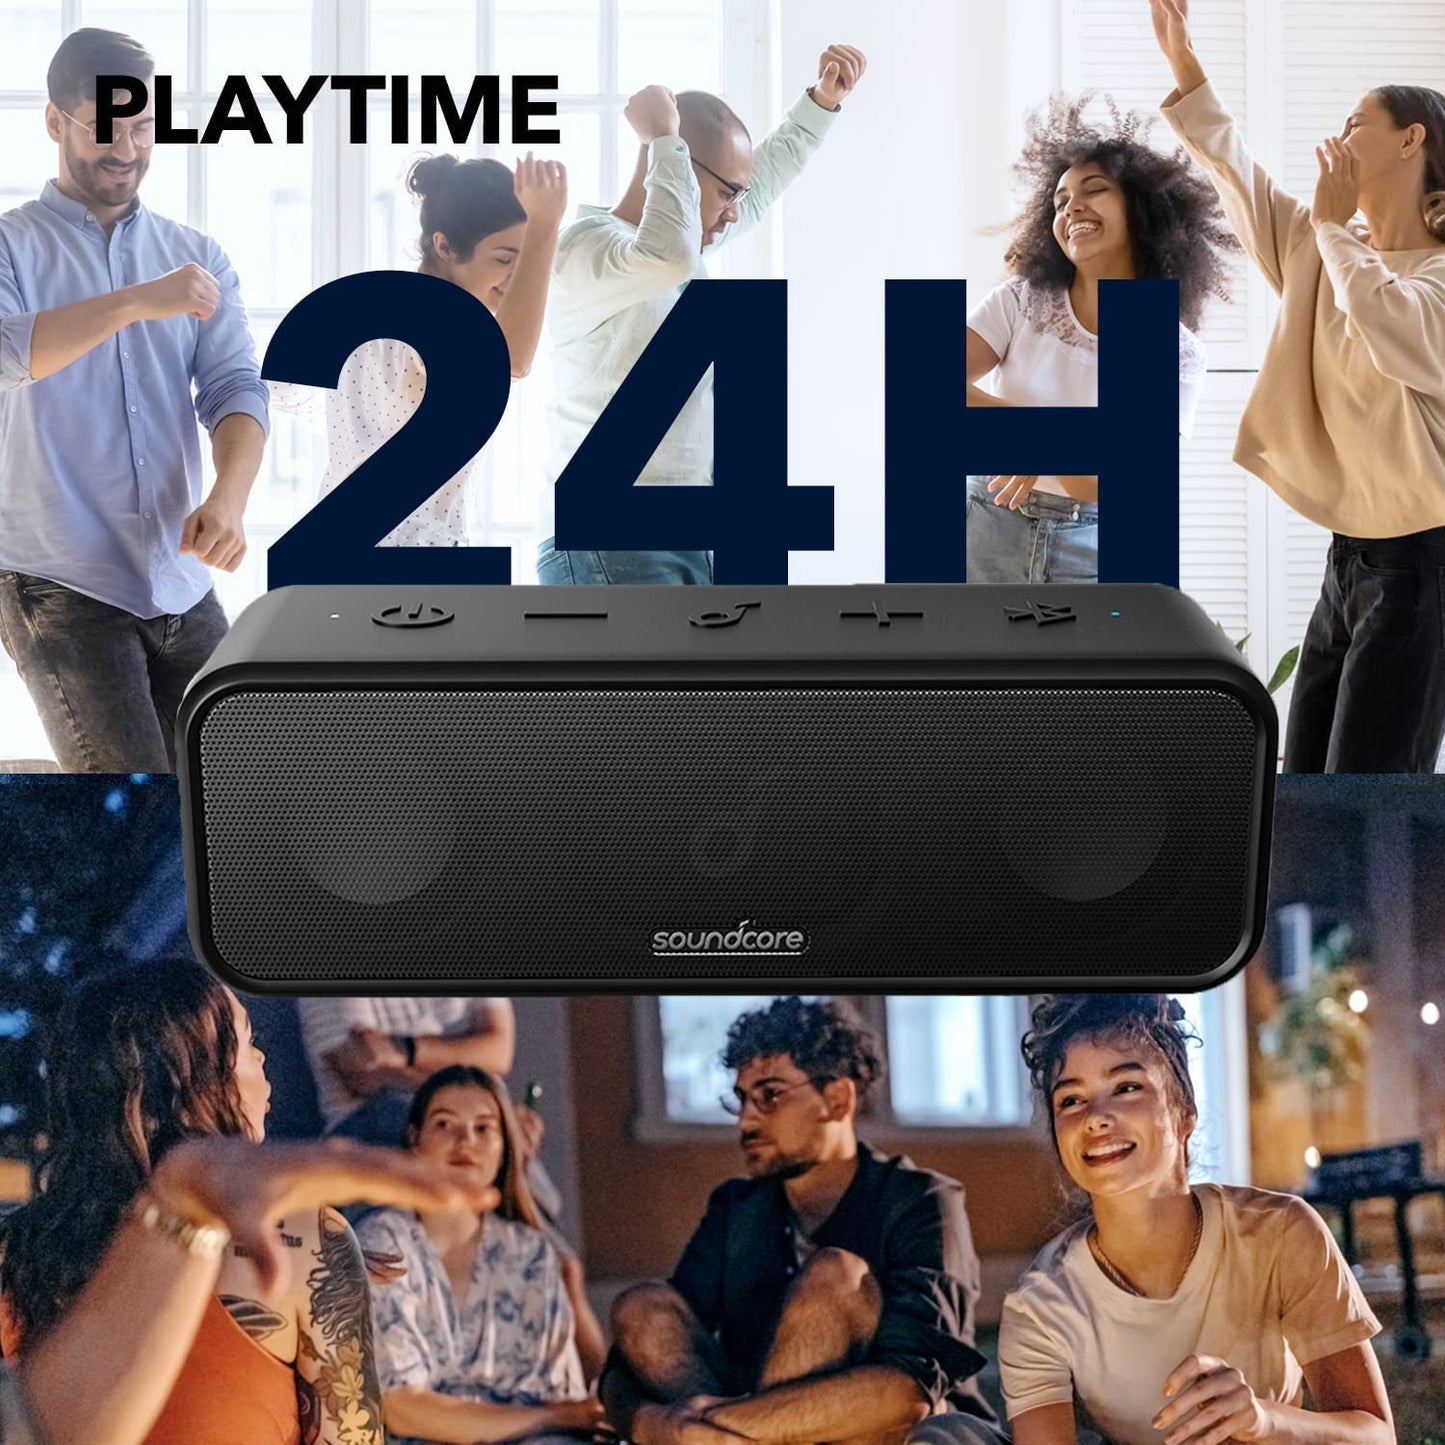 3 Portable Bluetooth Speaker - Wireless, IPX7 Waterproof, 24H Playtime, Pure Titanium Diaphragm Drivers, Partycast, Bassup, Custom EQ App - for Home, Outdoor, and Beach